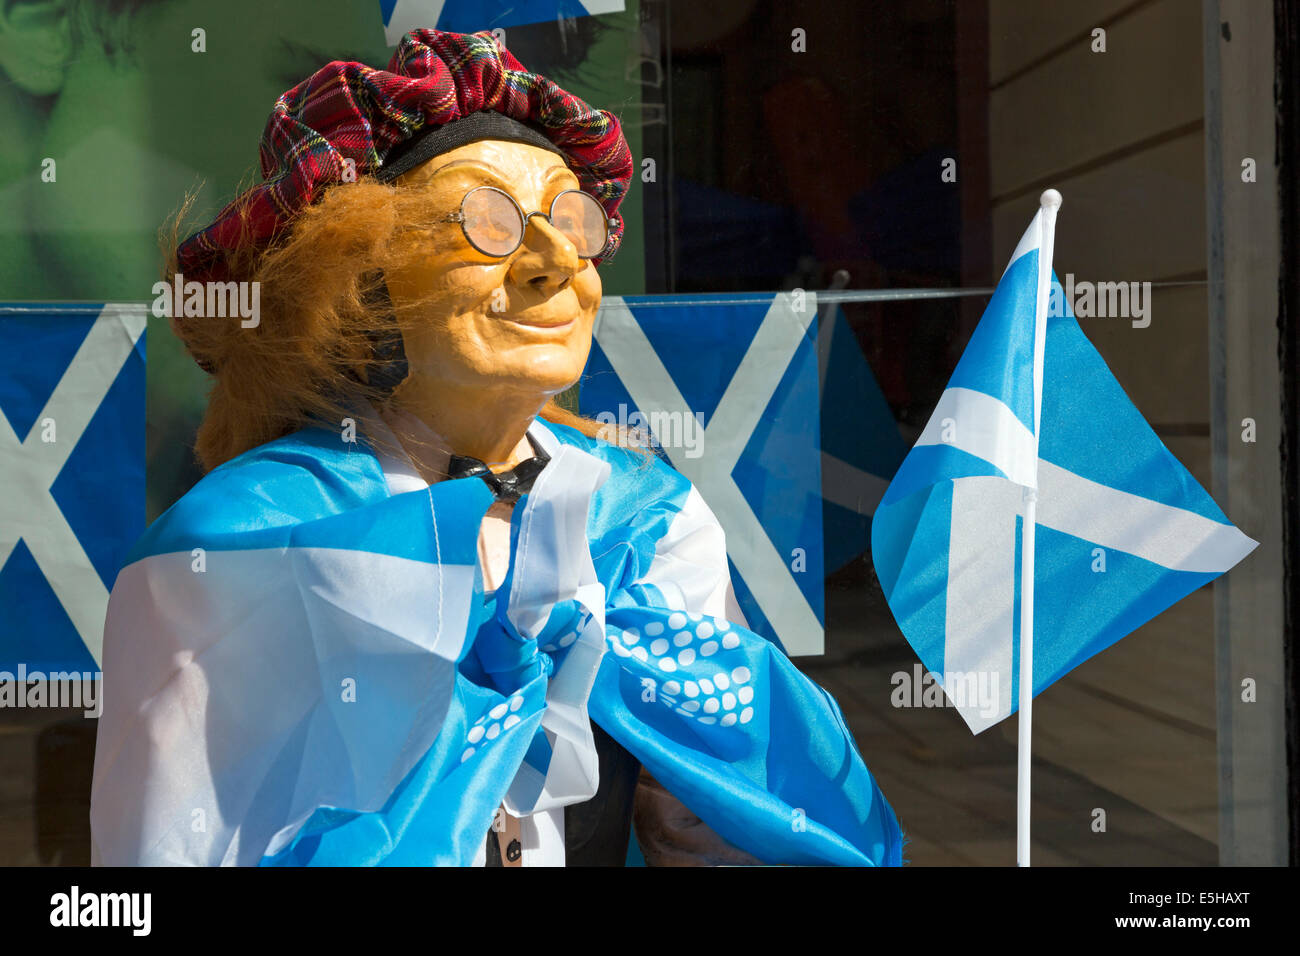 Small mannequin of a man dressed in a tartan hat, covered with a Saltire flag and carrying a small flag, showing support for the Stock Photo